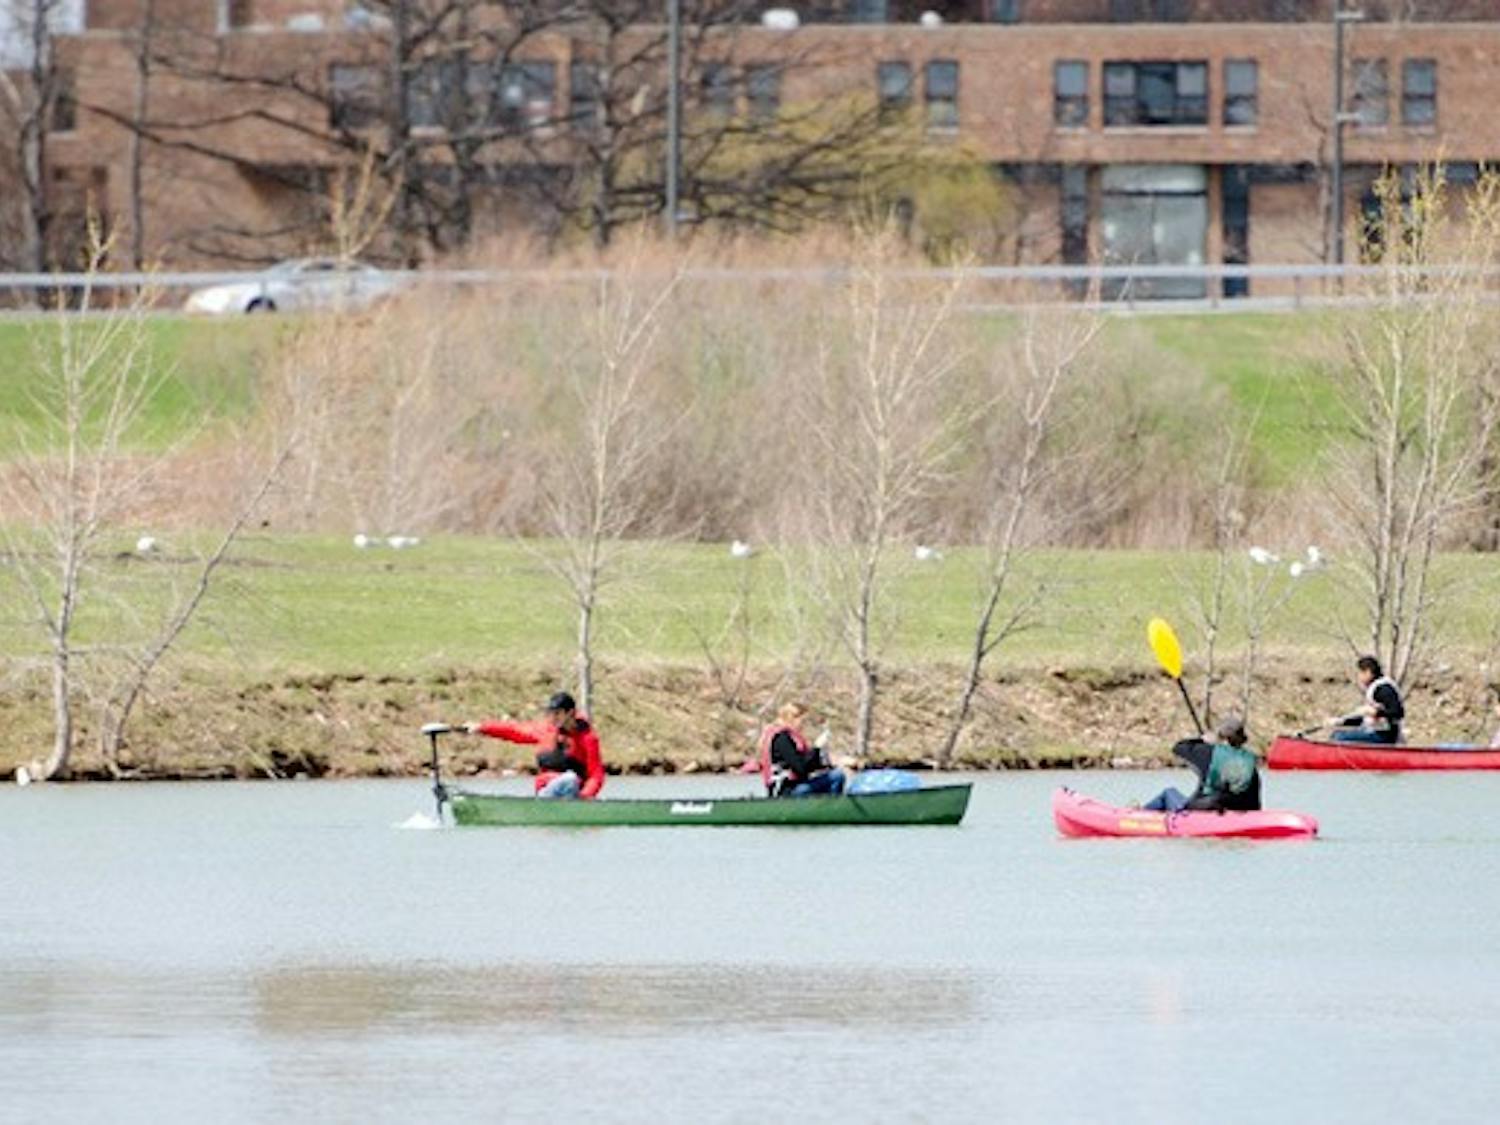 Students from the Outdoor Adventure club and volunteers were able to use kayaks and canoes for the first time to clean up parts of Lake LaSalle's shoreline that were inaccessible by land.